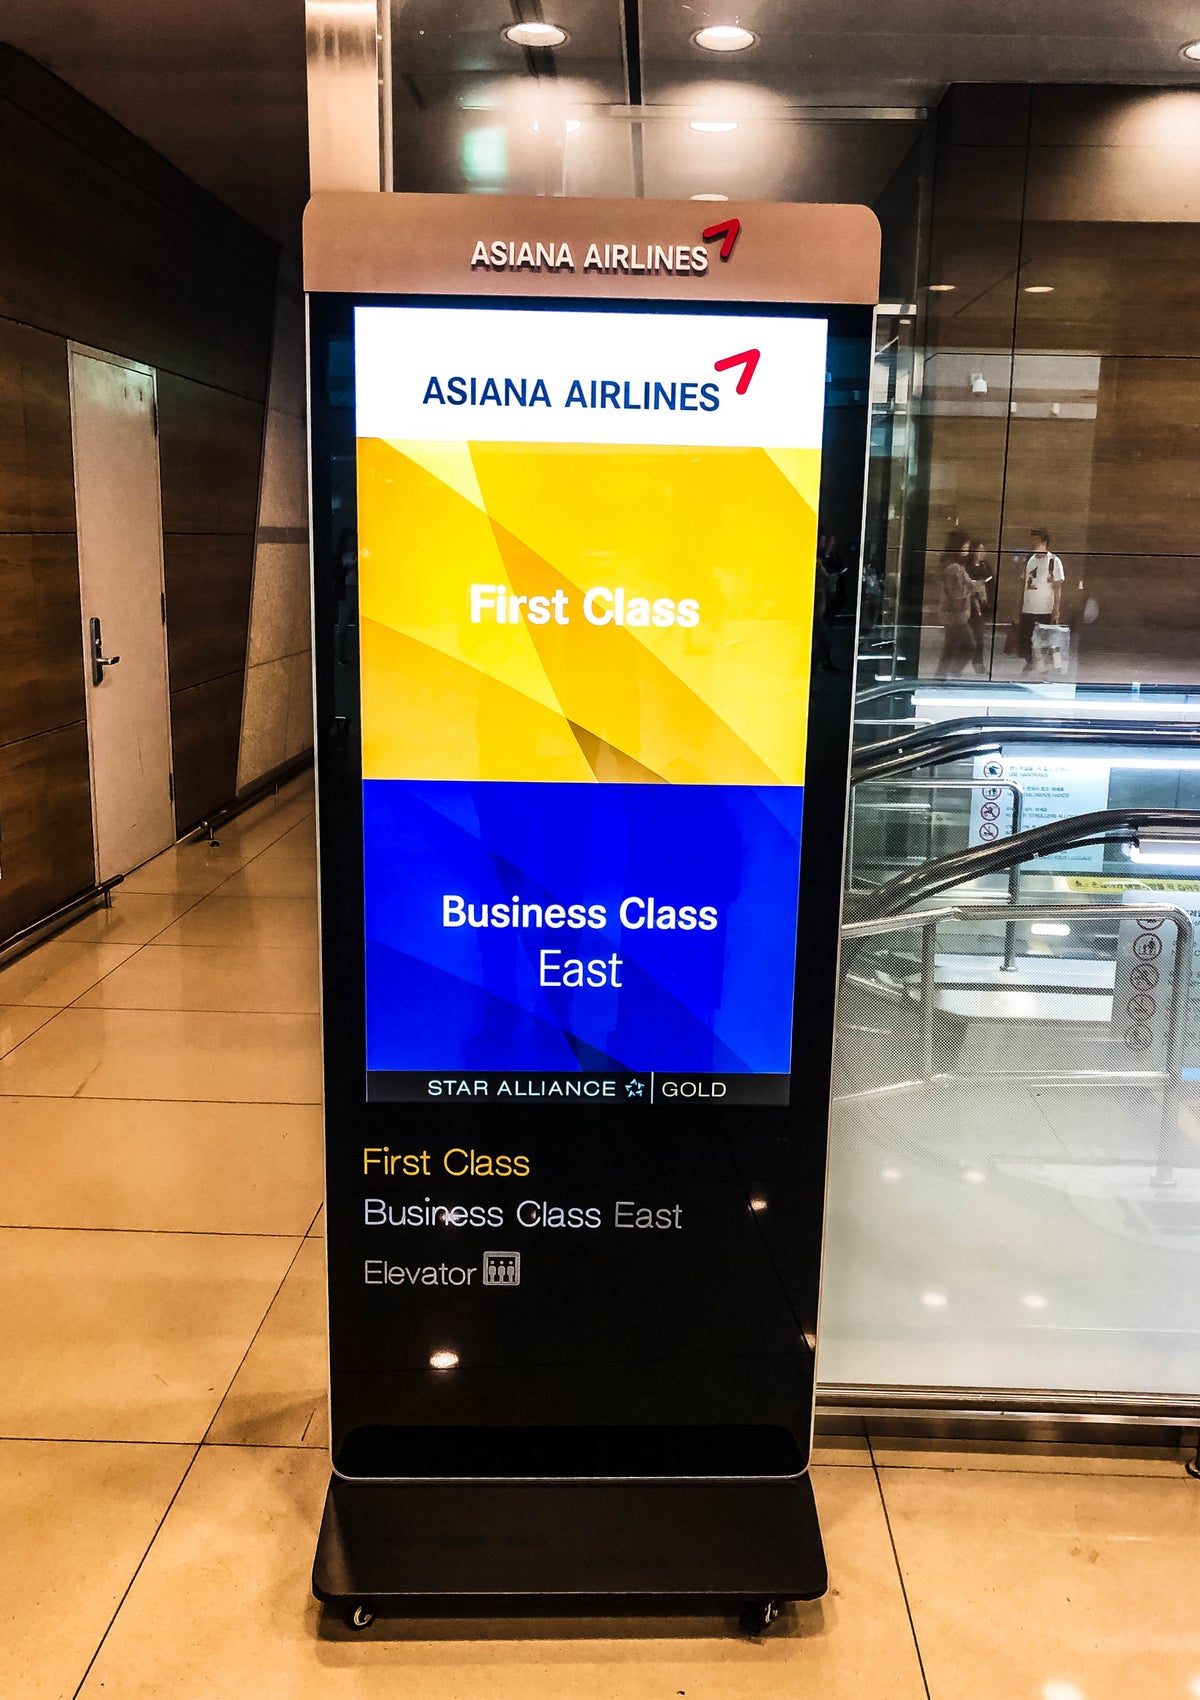 Asiana Airlines A380 First Class Lounge - Cherag Dubash